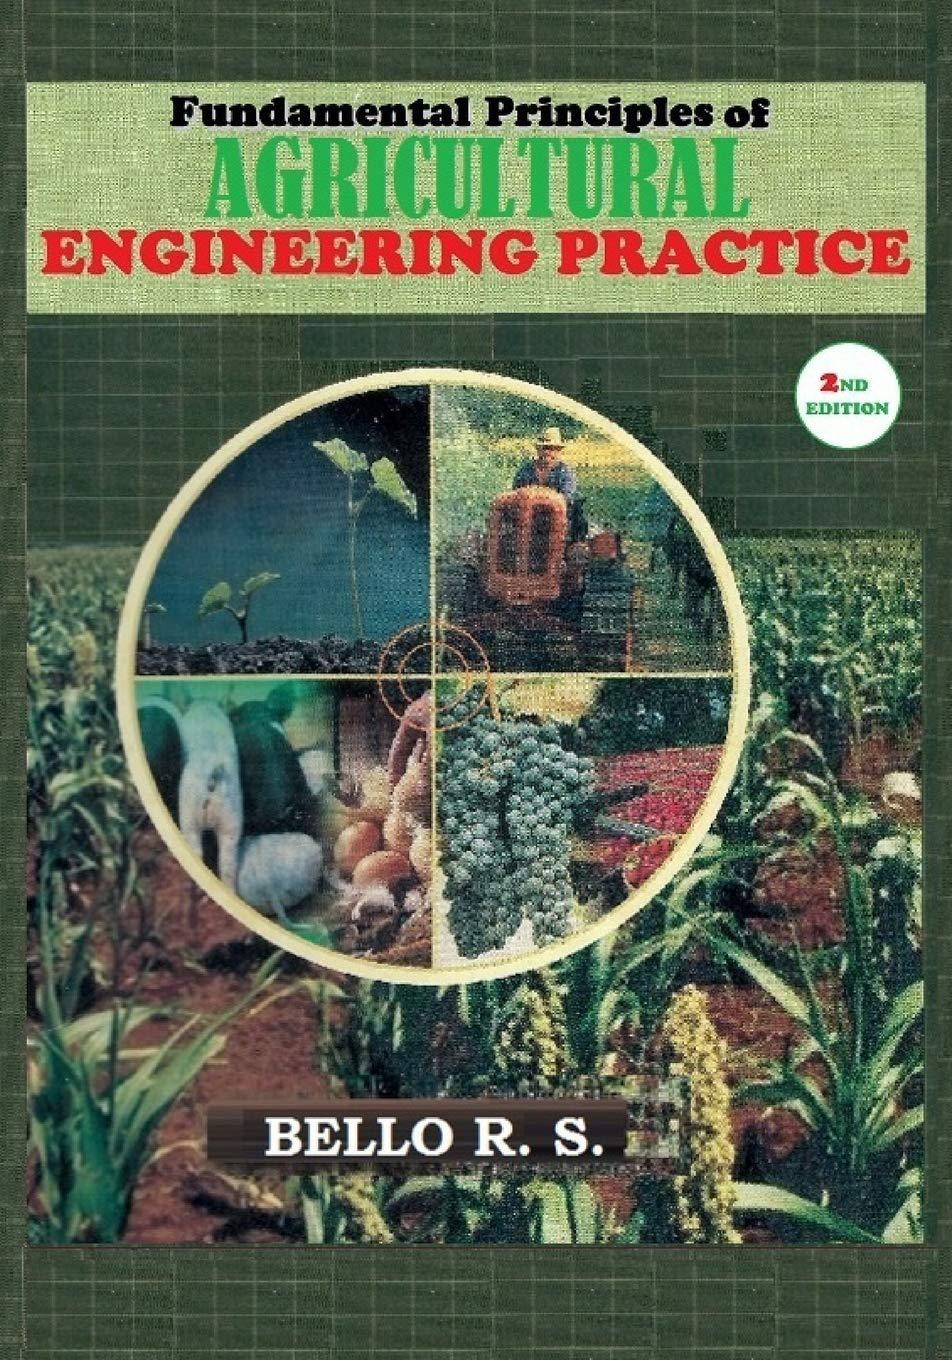 fundamental principles of agricultural engineering practice 2nd edition bello r. s. 1097985024, 978-1097985029